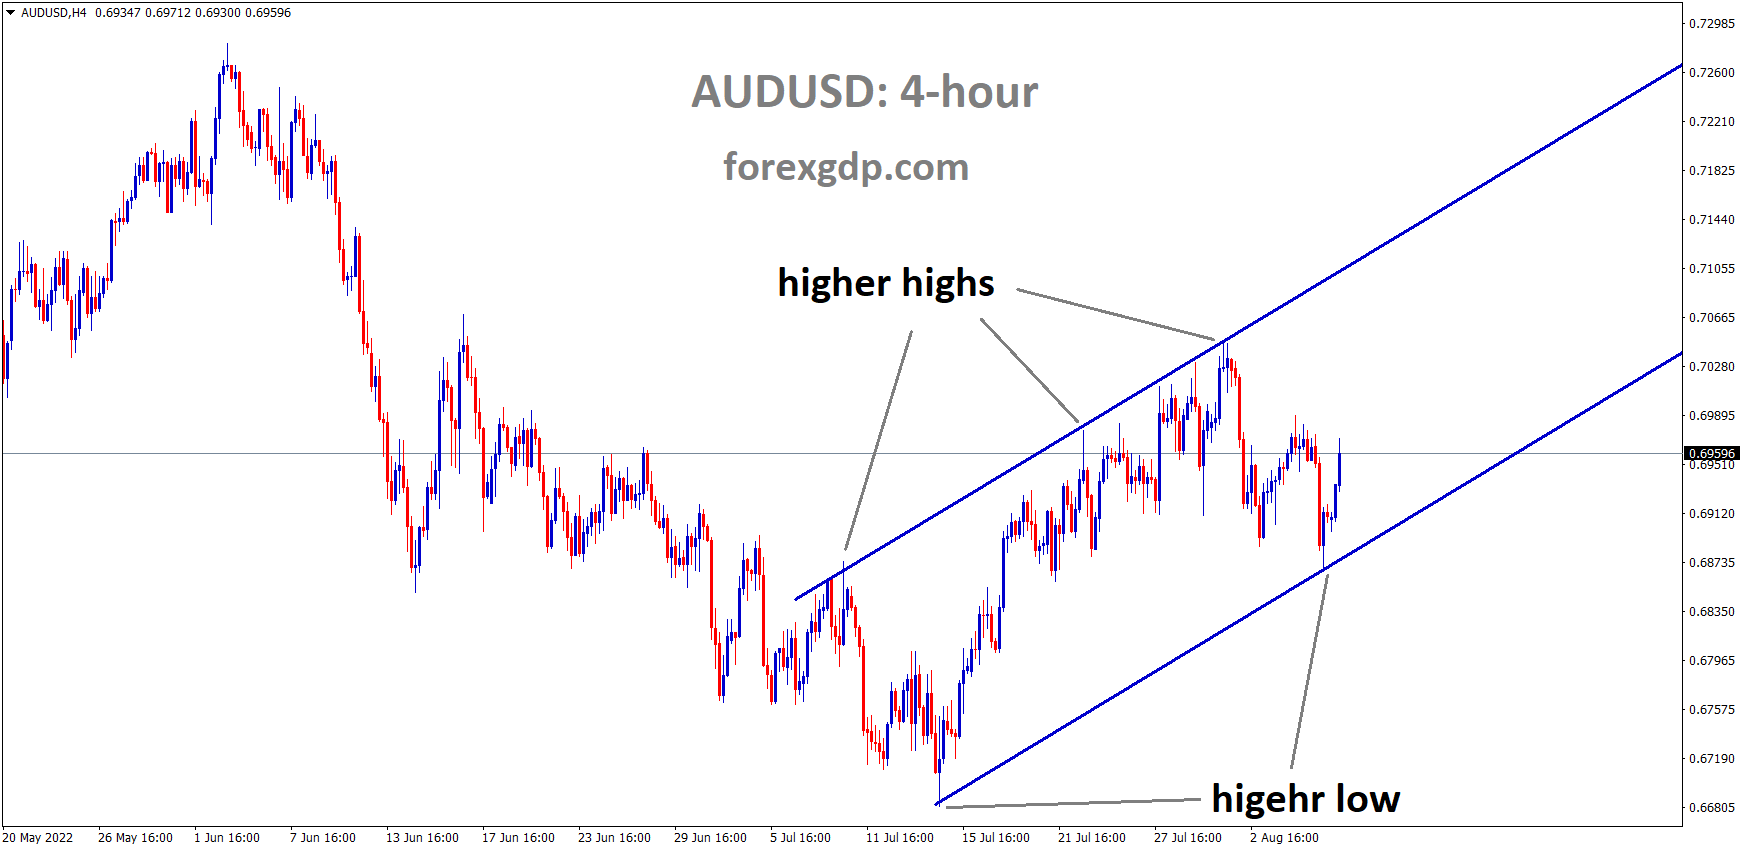 AUDUSD H4 TF analysis Market is moving in an Ascending channel and the Market has rebounded from the higher low area of the channel